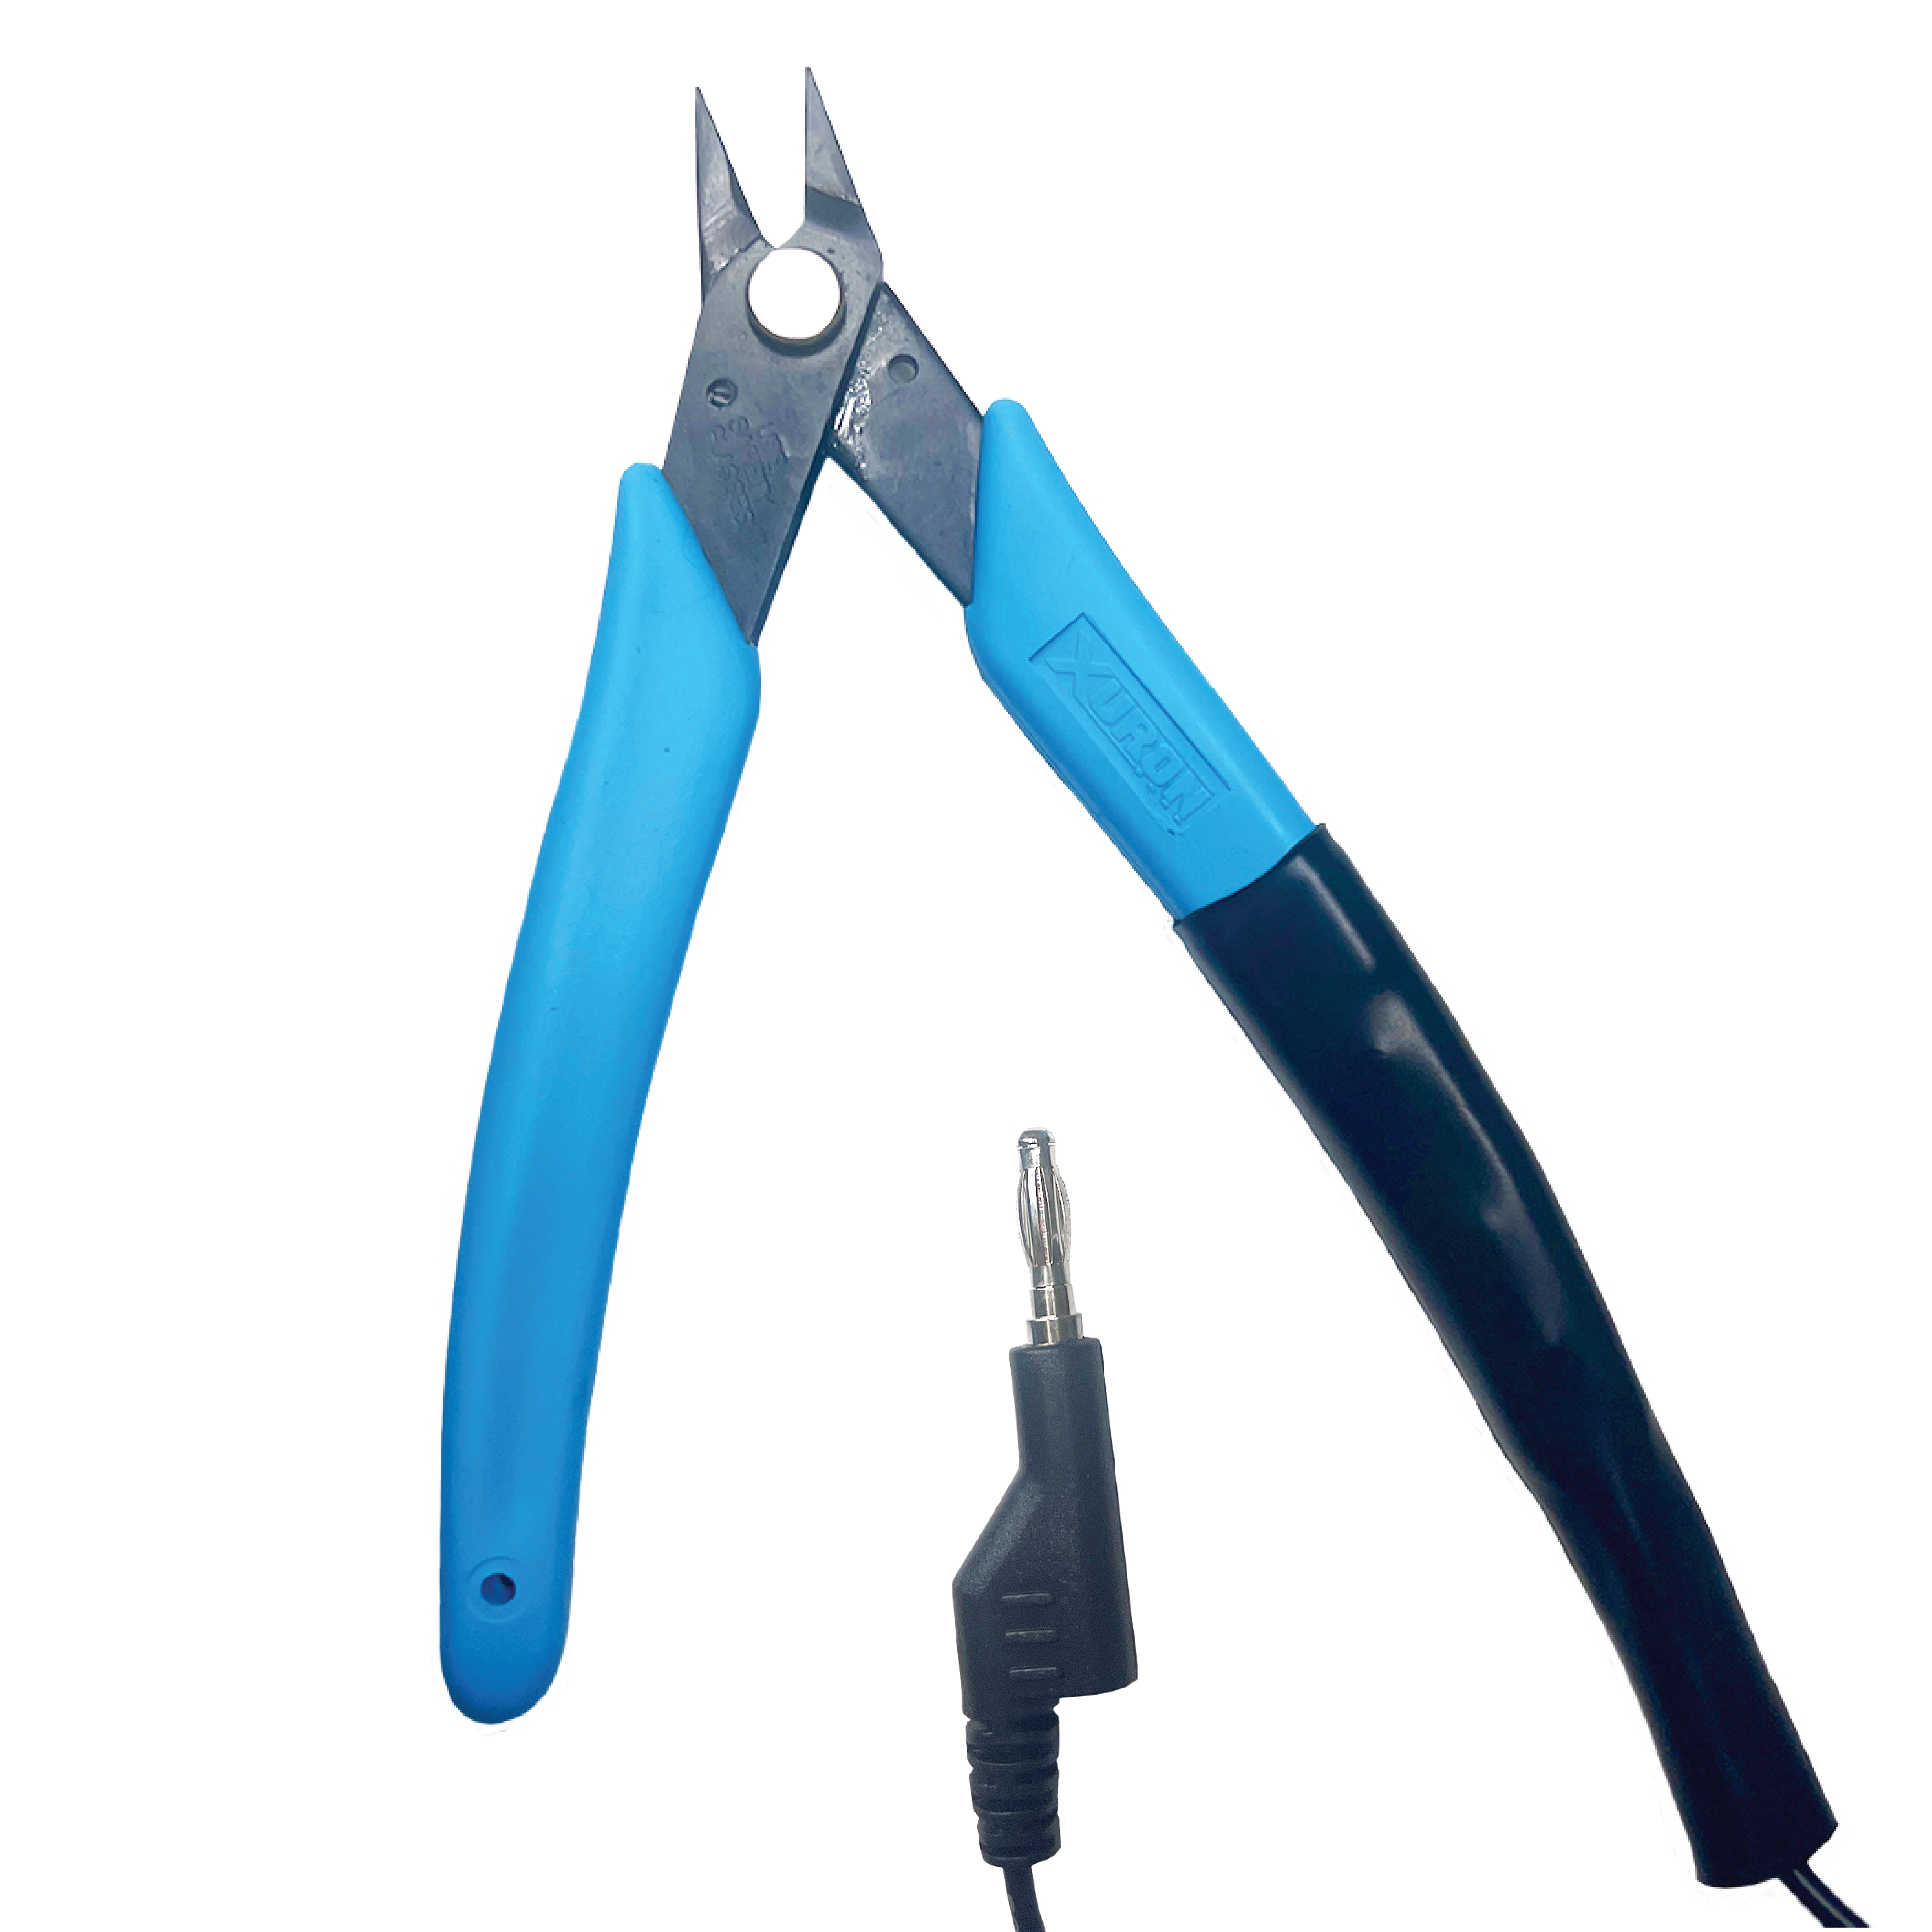 Flat nose plier with connection